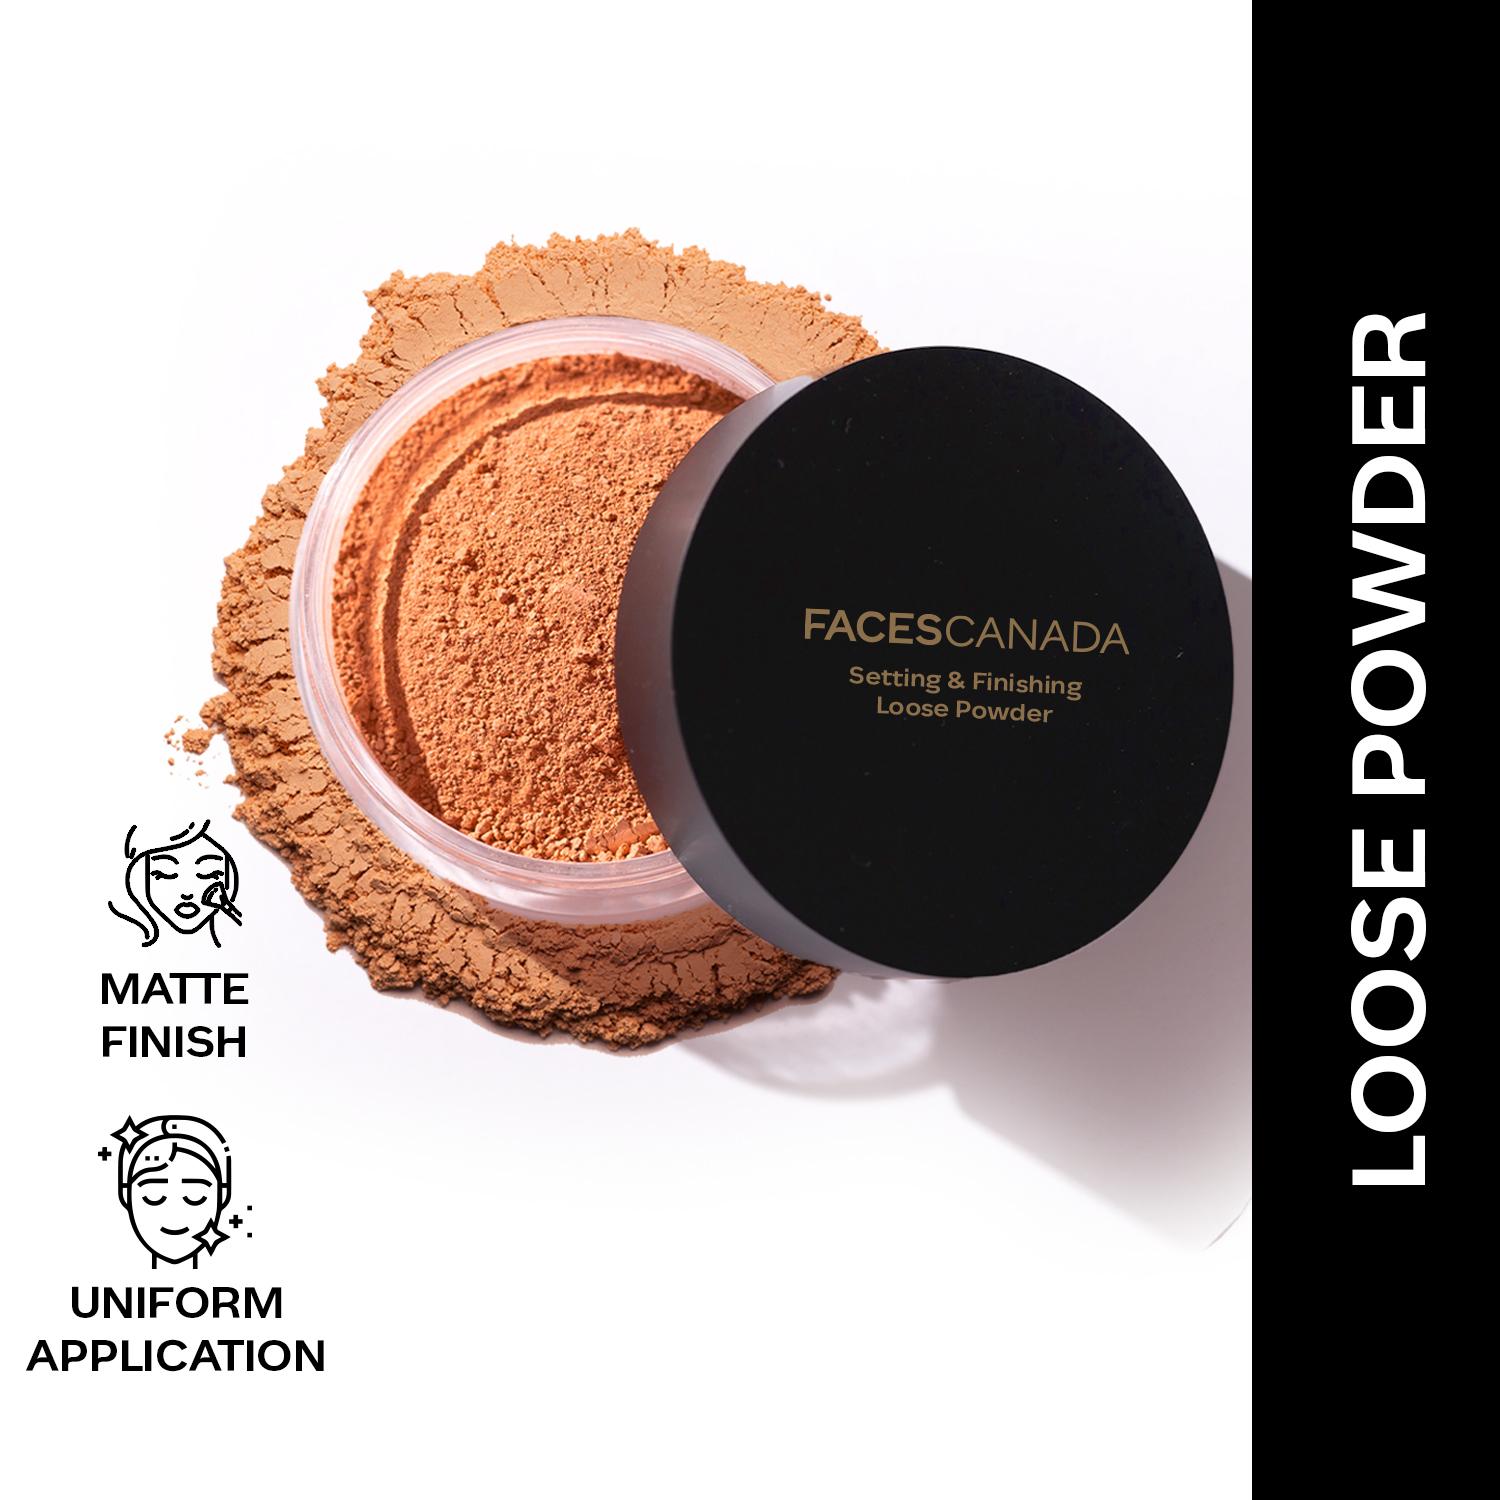 Faces Canada | Faces Canada Setting and Finishing Loose Powder, Sheer Coverage & Naturally Radiant Finish (10 g)